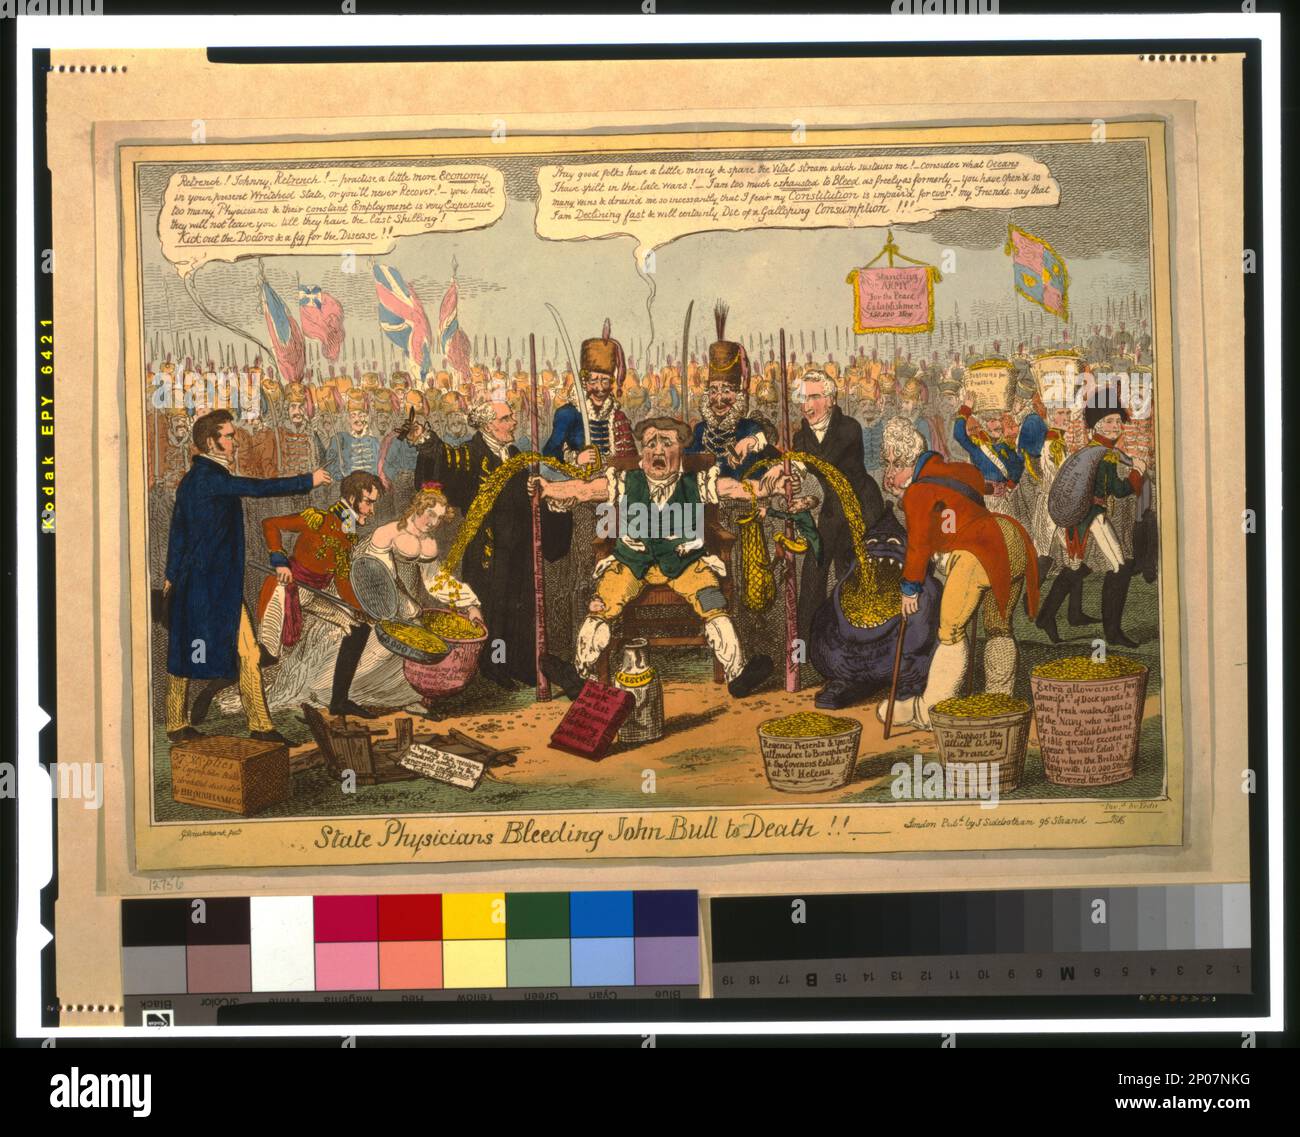 State physicians bleeding John Bull to death!!   G. Cruikshank fect. ; Invd. by Yedis.. British Cartoon Prints Collection , Catalogue of prints and drawings in the British Museum. Division I, political and personal satires, v. 9, no. 12756. Vansittart, Nicholas,1766-1851. , Castlereagh, Robert Stewart,Viscount,1769-1822. , Brougham and Vaux, Henry Brougham,Baron,1778-1868. , George,IV,King of Great Britain,1762-1830. , John Bull (Symbolic character),1810-1820. , Taxes,England,1810-1820. , Military personnel,England,1810-1820. Stock Photo